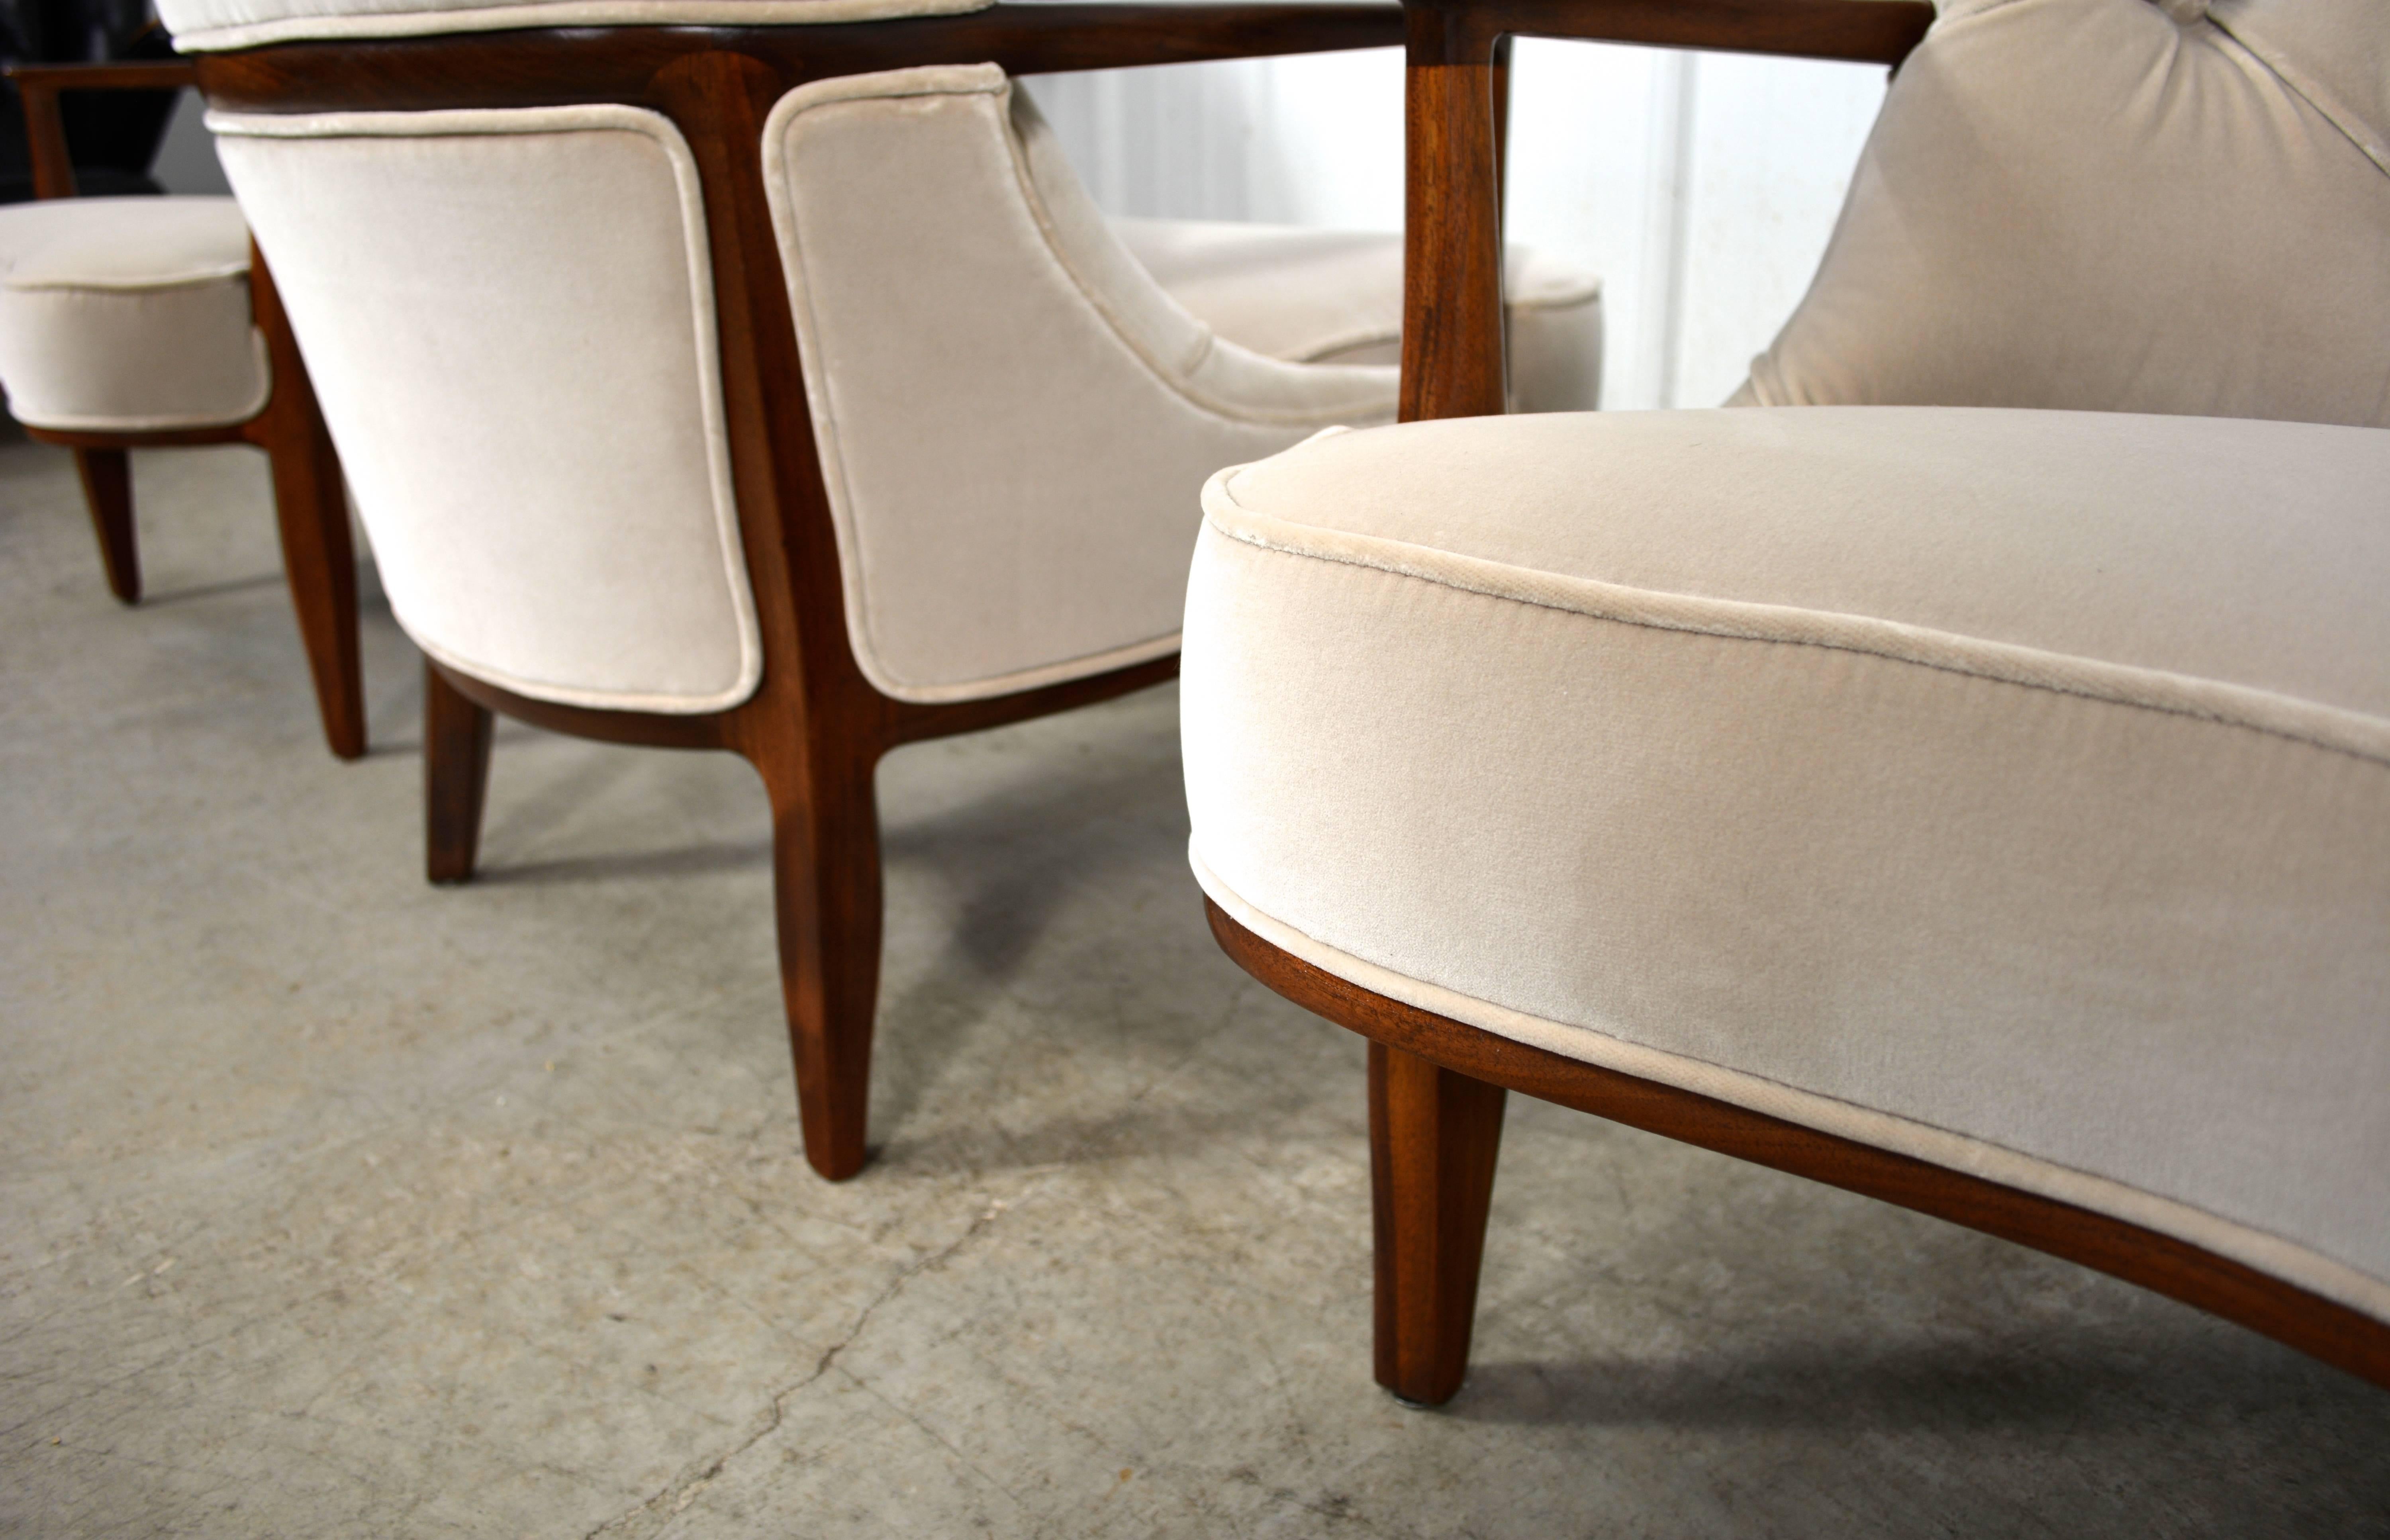 Mid-20th Century Edward Wormley Set of Four Janus Chairs for Dunbar For Sale